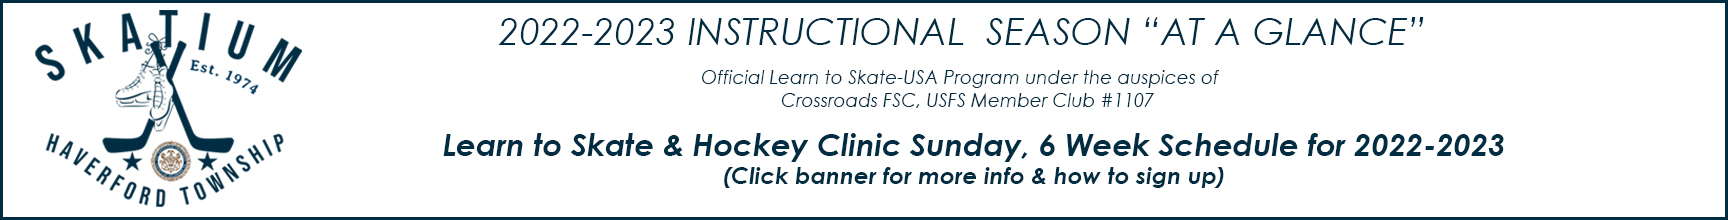 Learn to Skate & Hockey Clinic for 2022-23 Information  & Sign Up Link